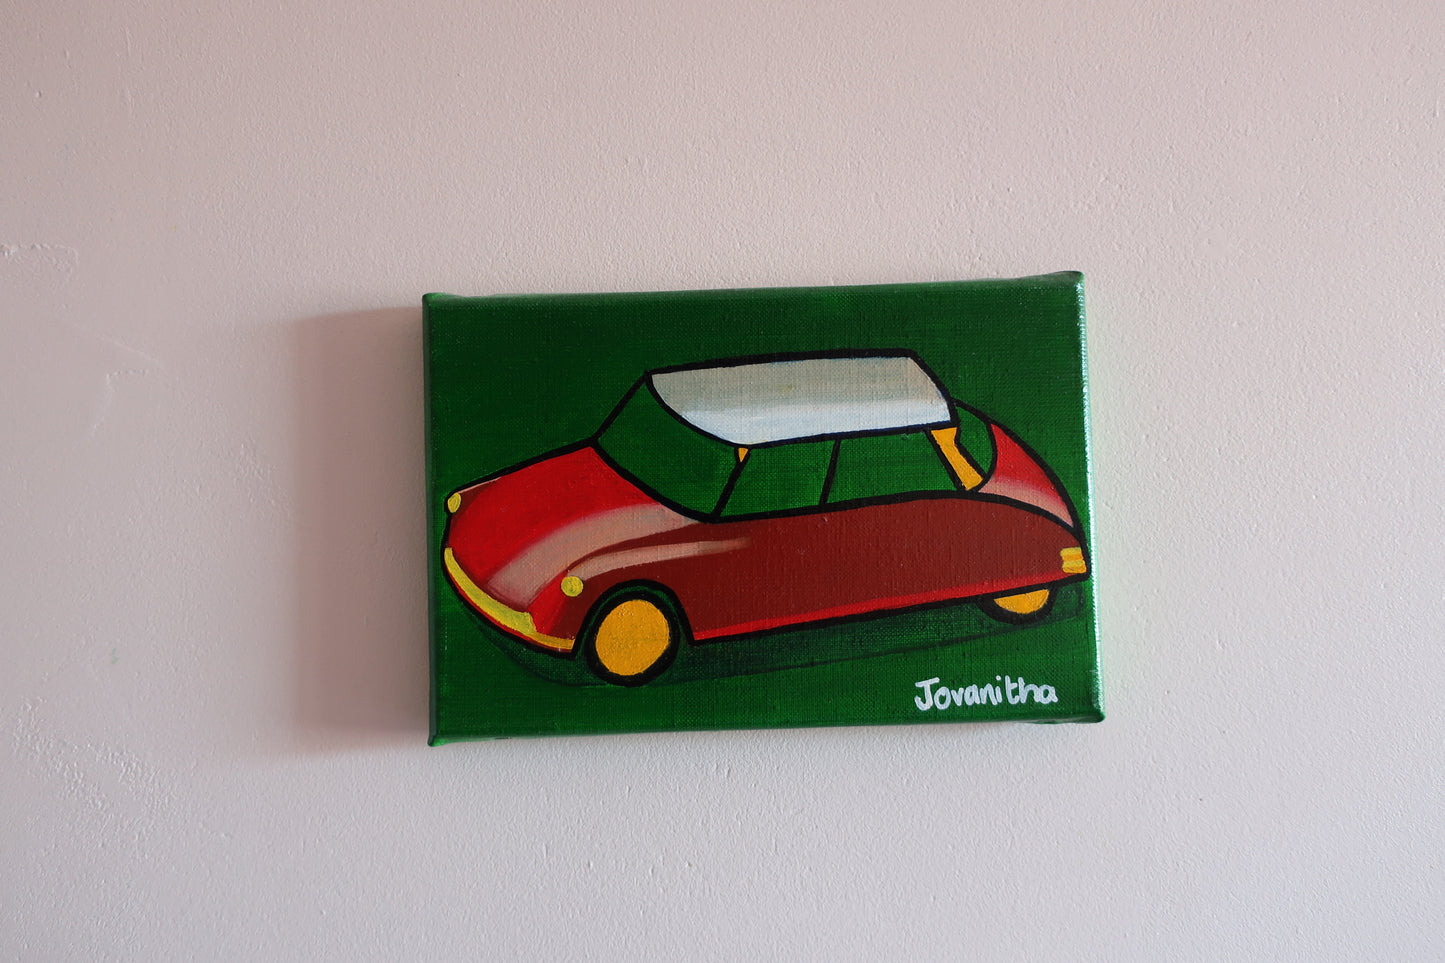 An oil painting of a red Citroen DS car against a green background on a white wall